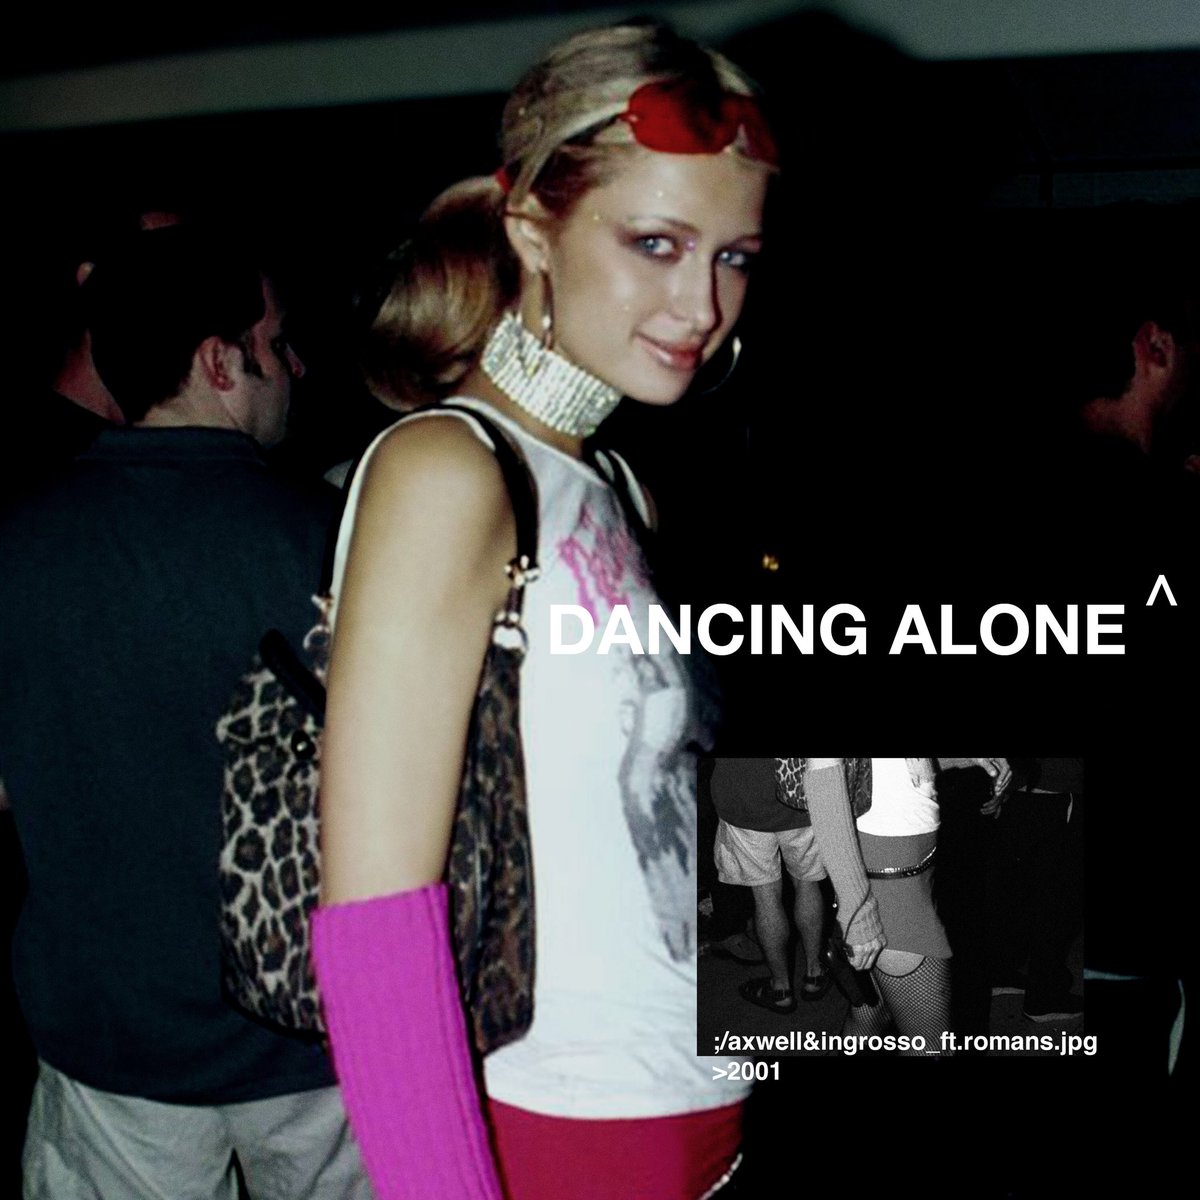 Loving the new artwork cover for @AxwellIngrosso1’s new track #DancingAlone ✨????????✨ #TheOG https://t.co/6jlNOtnjOE